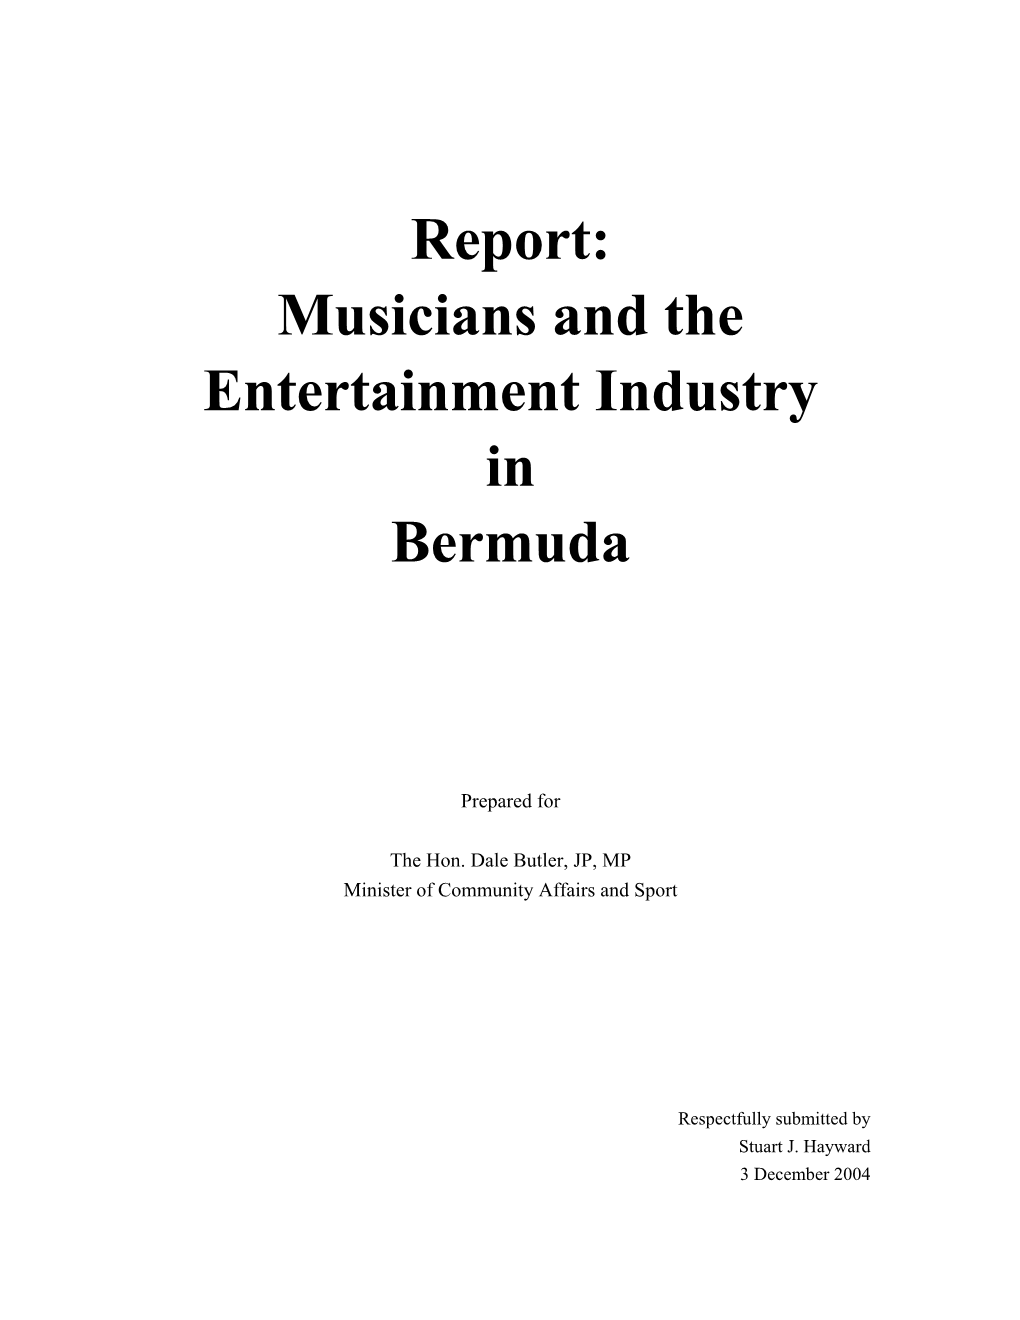 Report: Musicians and the Entertainment Industry in Bermuda